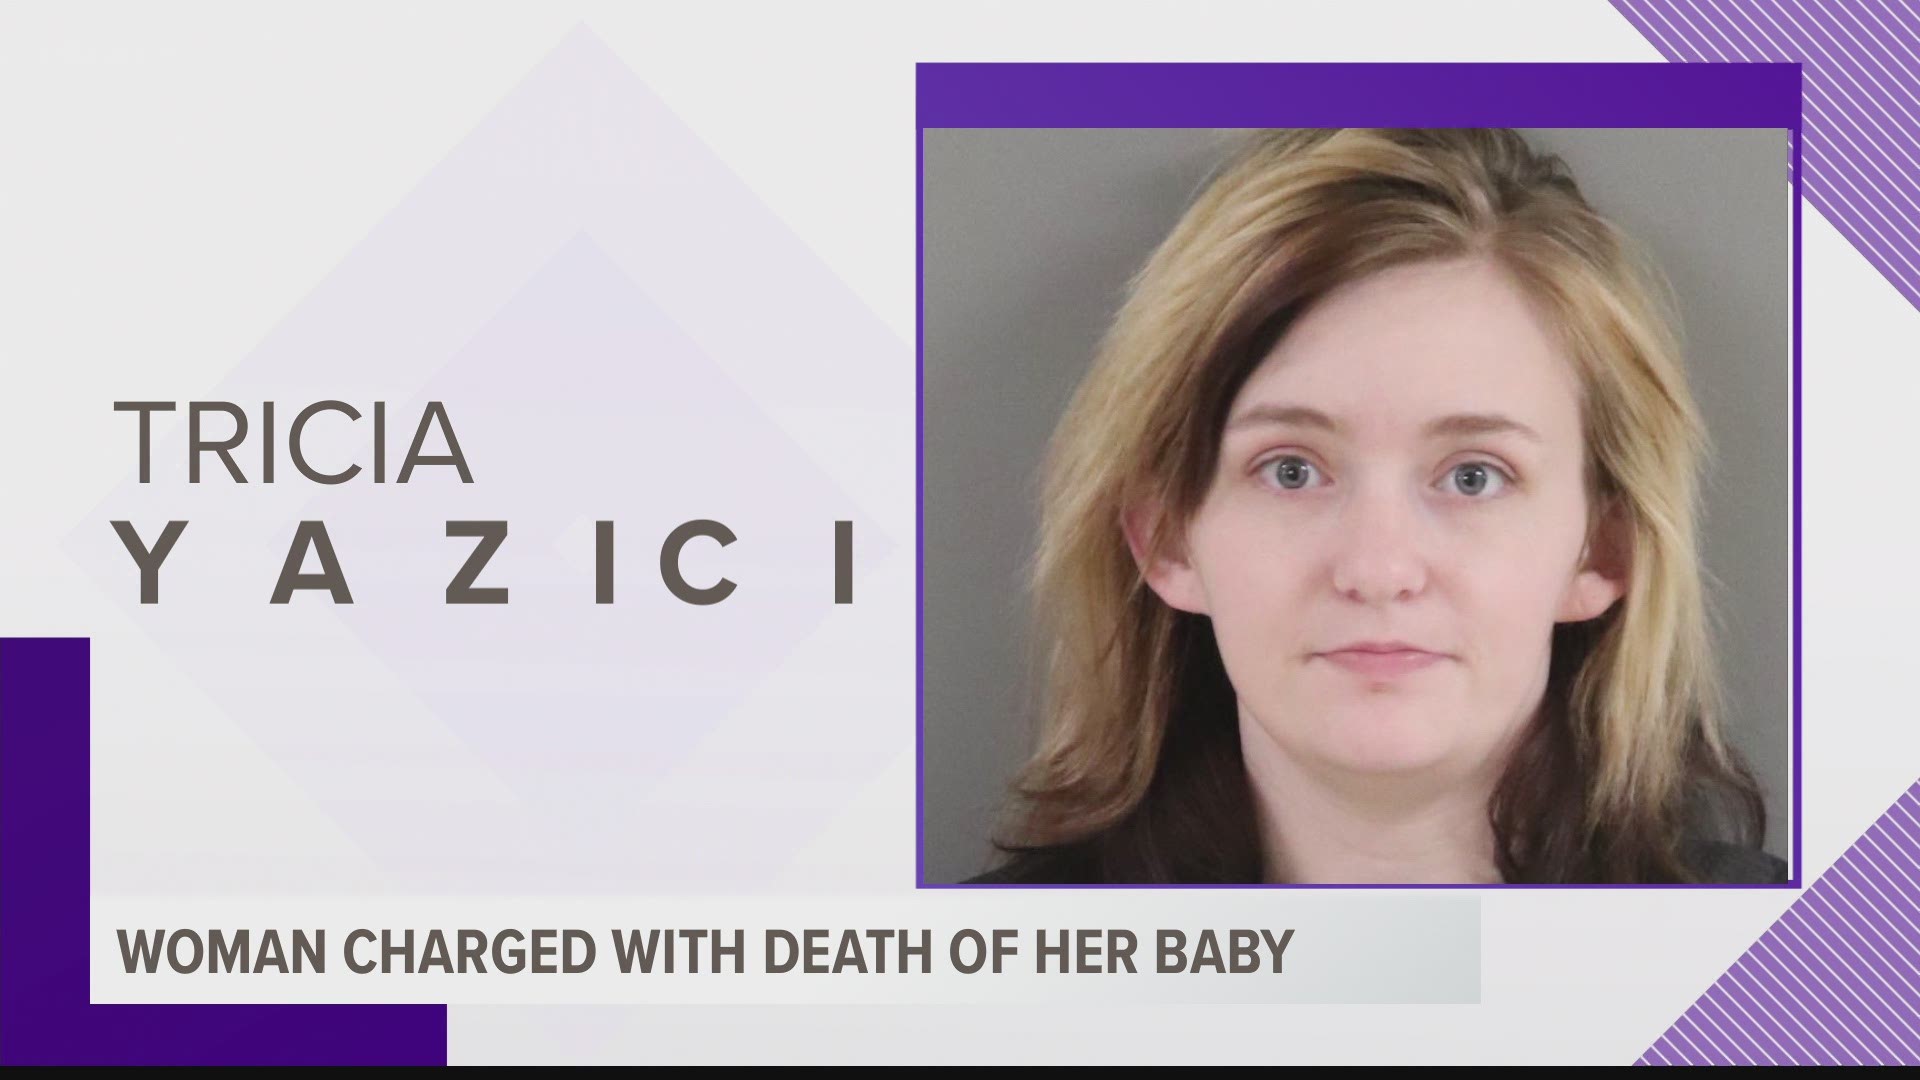 Authorities say the woman gave birth to a 25-week-old child who tested positive for methamphetamine. The child died later that day.